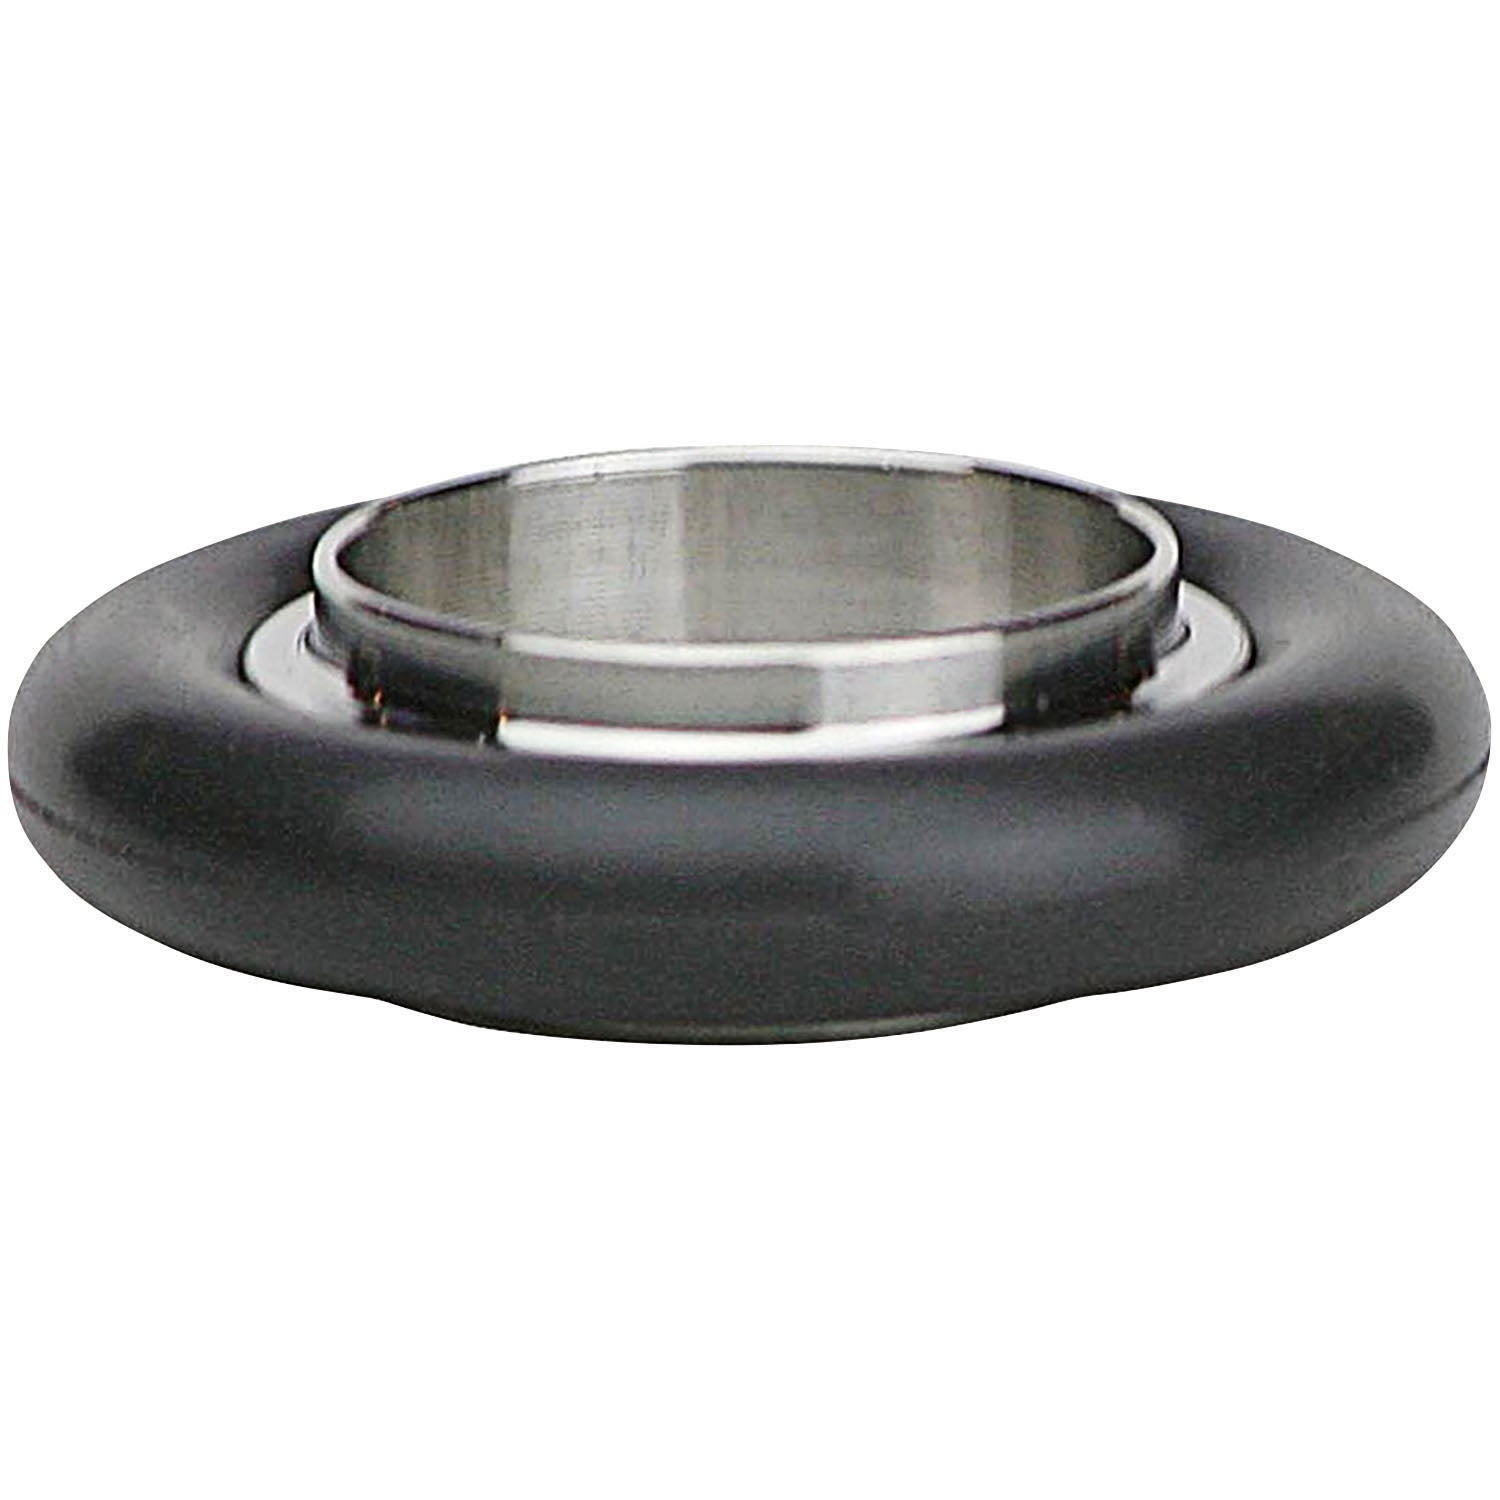 Welch 303102 CENTERING RING ASSEMBLY NW 25